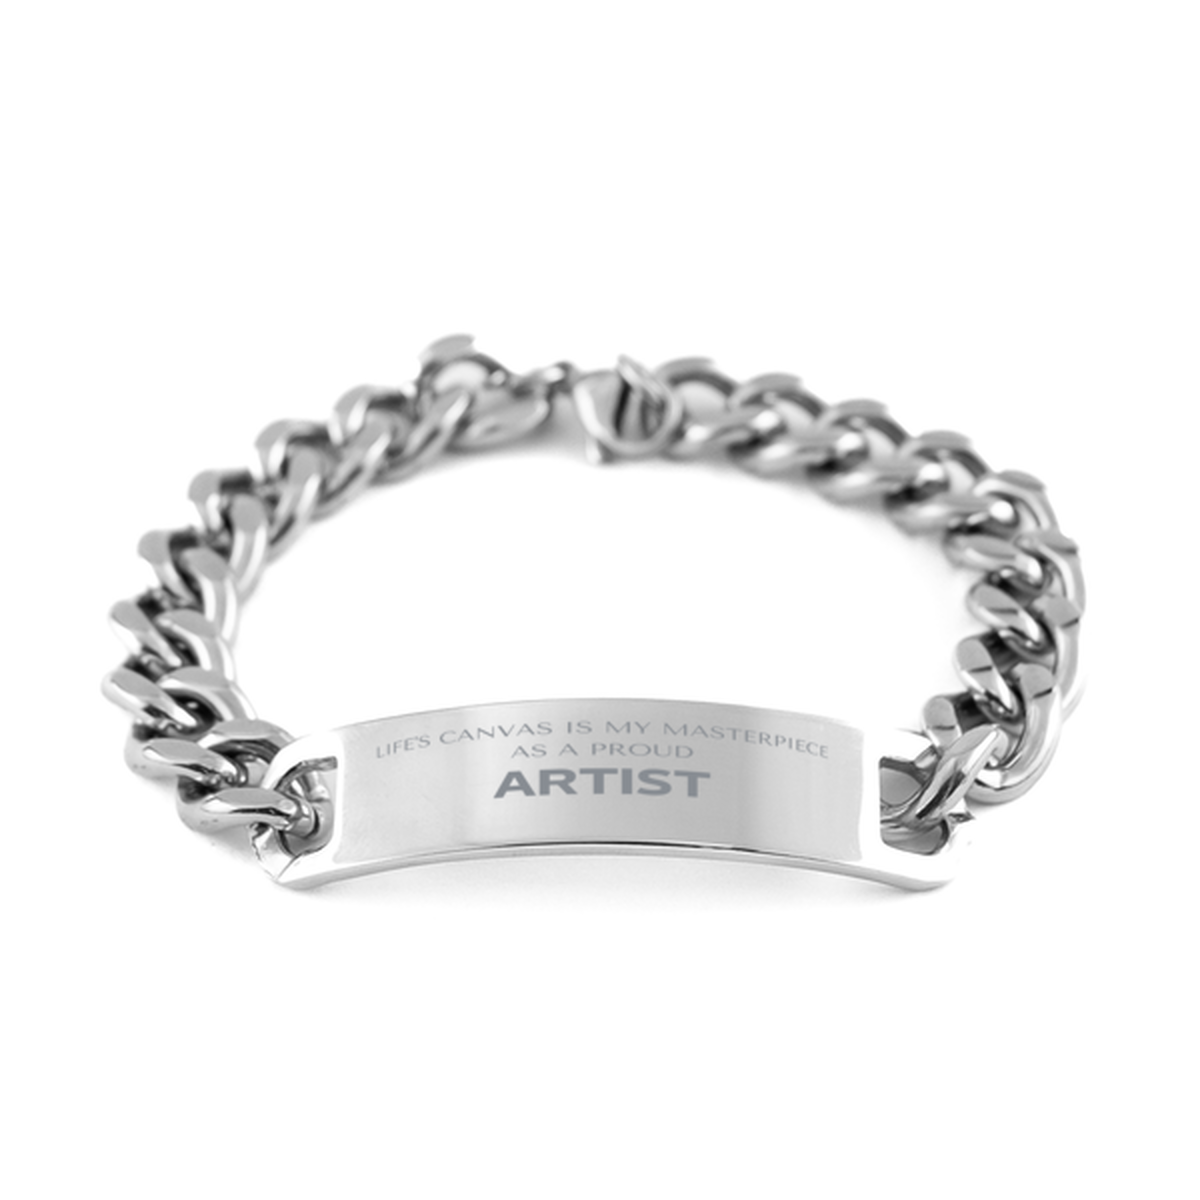 Proud Artist Gifts, Life's canvas is my masterpiece, Epic Birthday Christmas Unique Cuban Chain Stainless Steel Bracelet For Artist, Coworkers, Men, Women, Friends